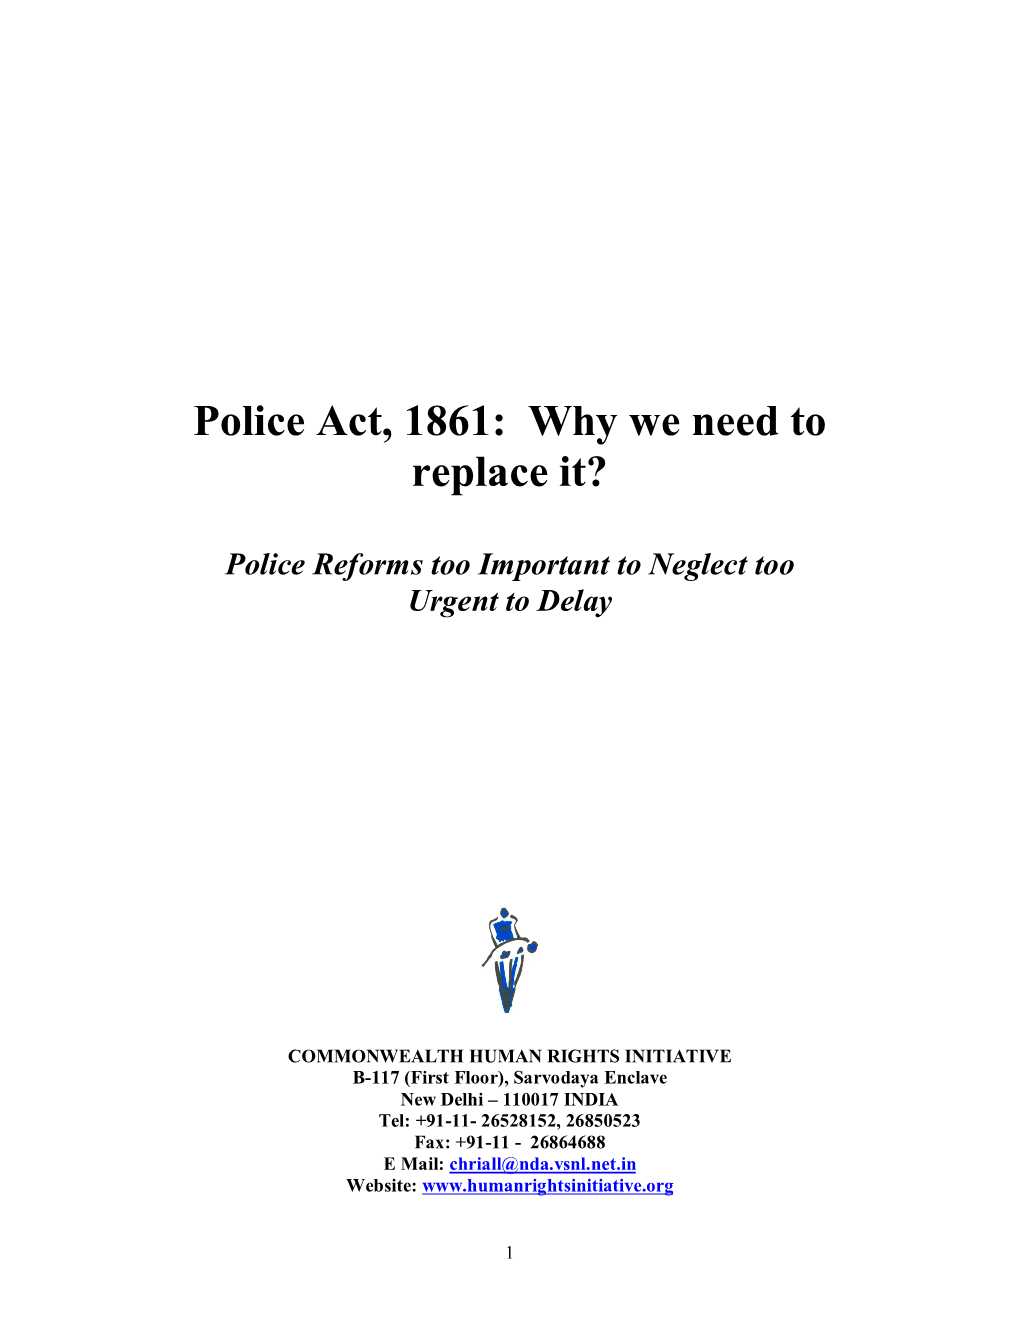 Police Act, 1861: Why We Need to Replace It?